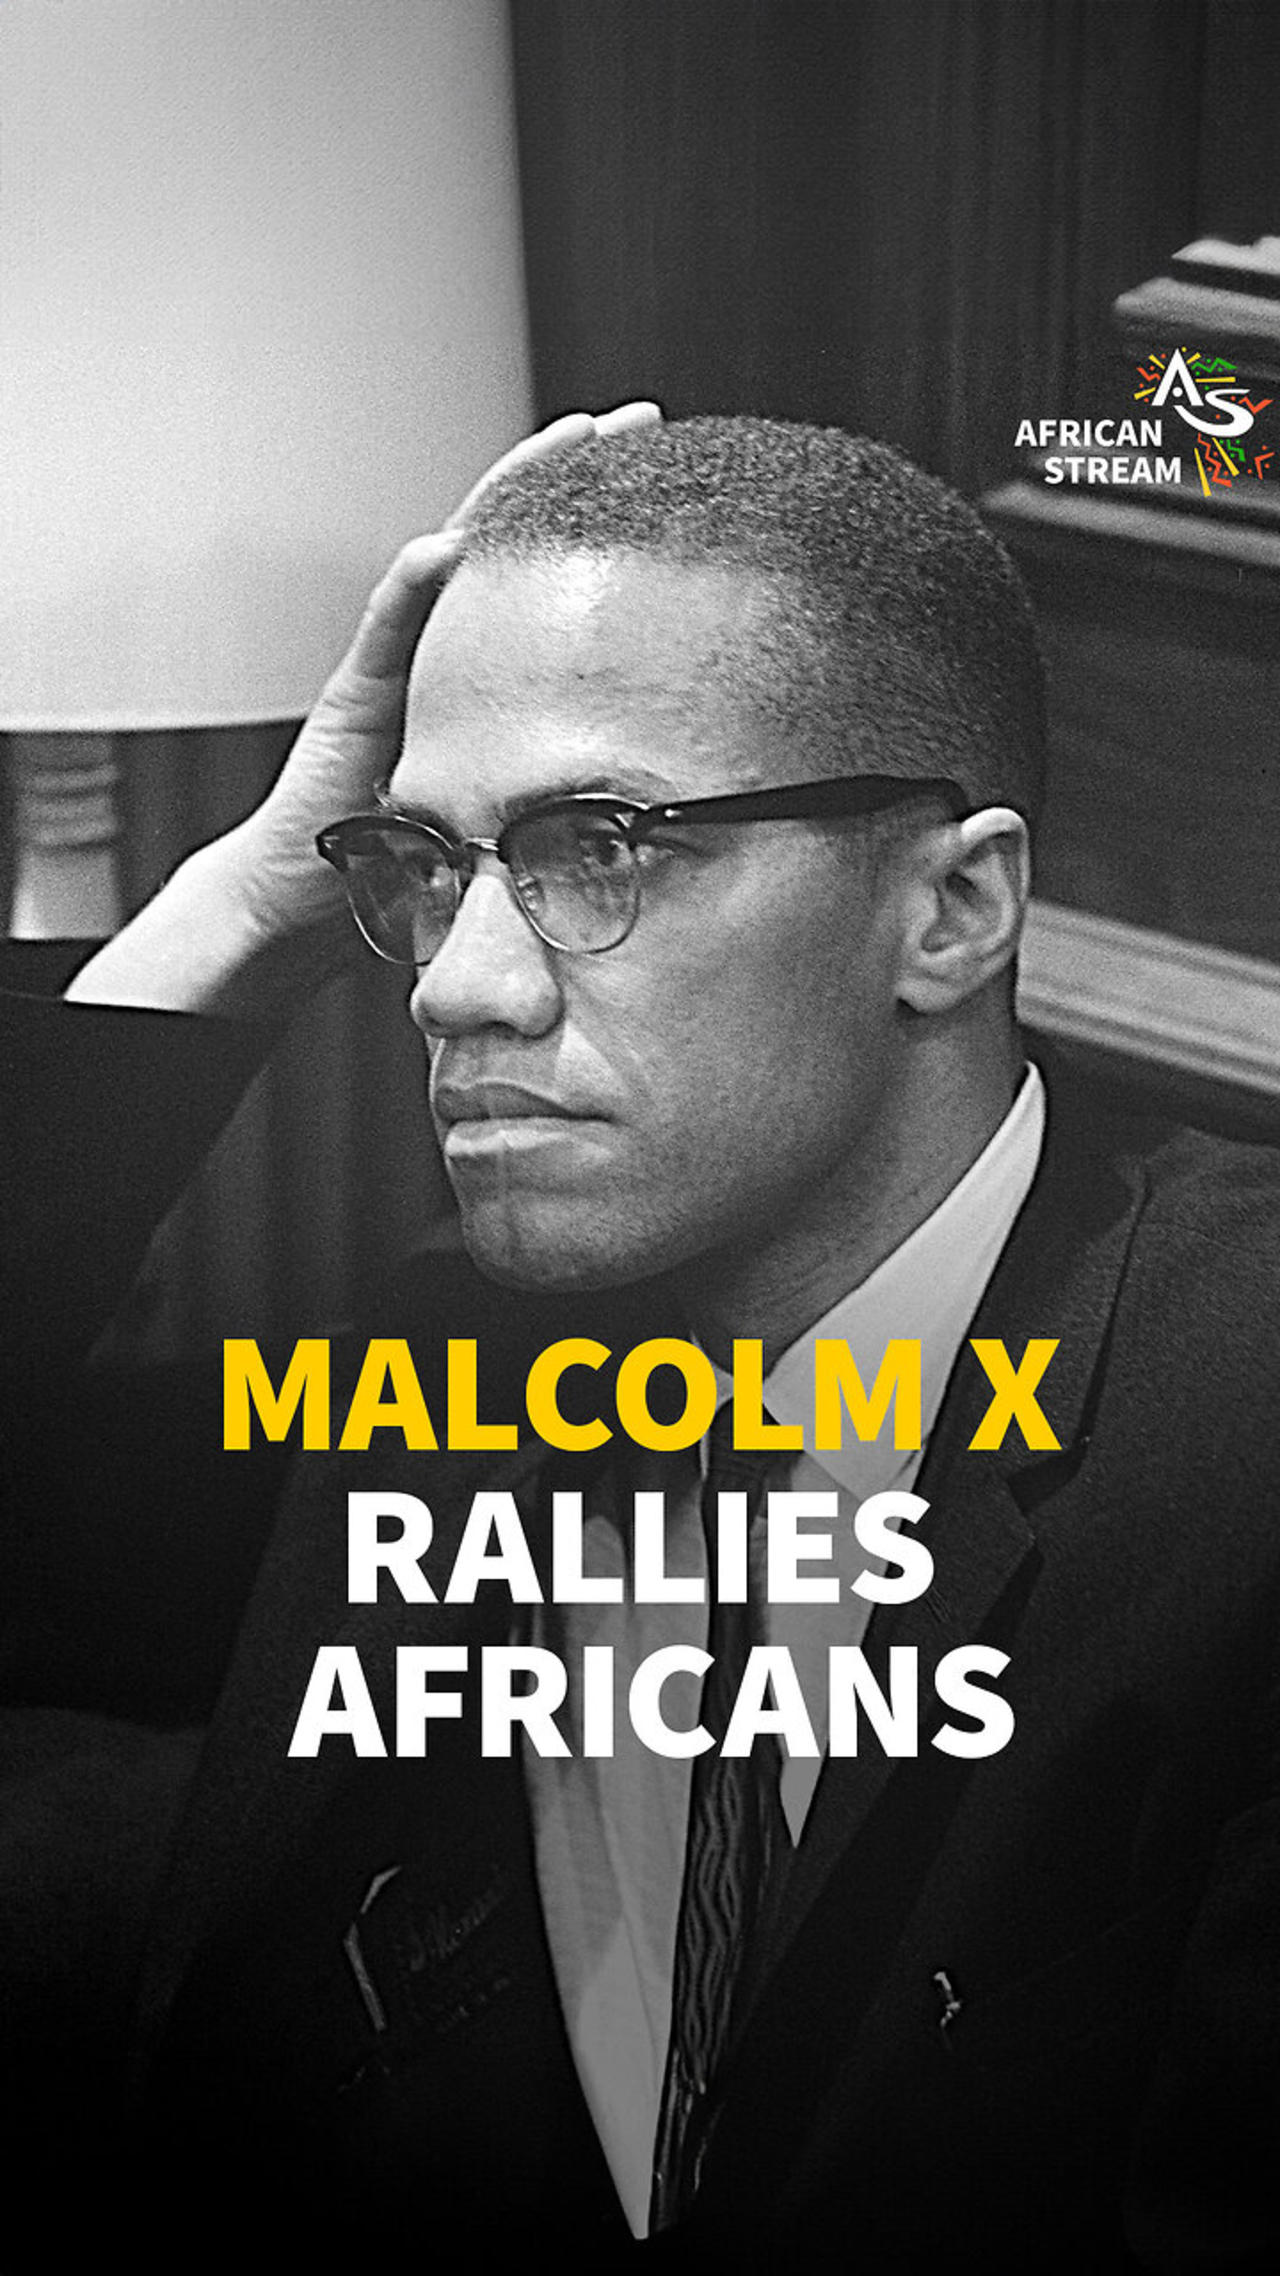 MALCOLM X RALLIES AFRICANS – One News Page VIDEO